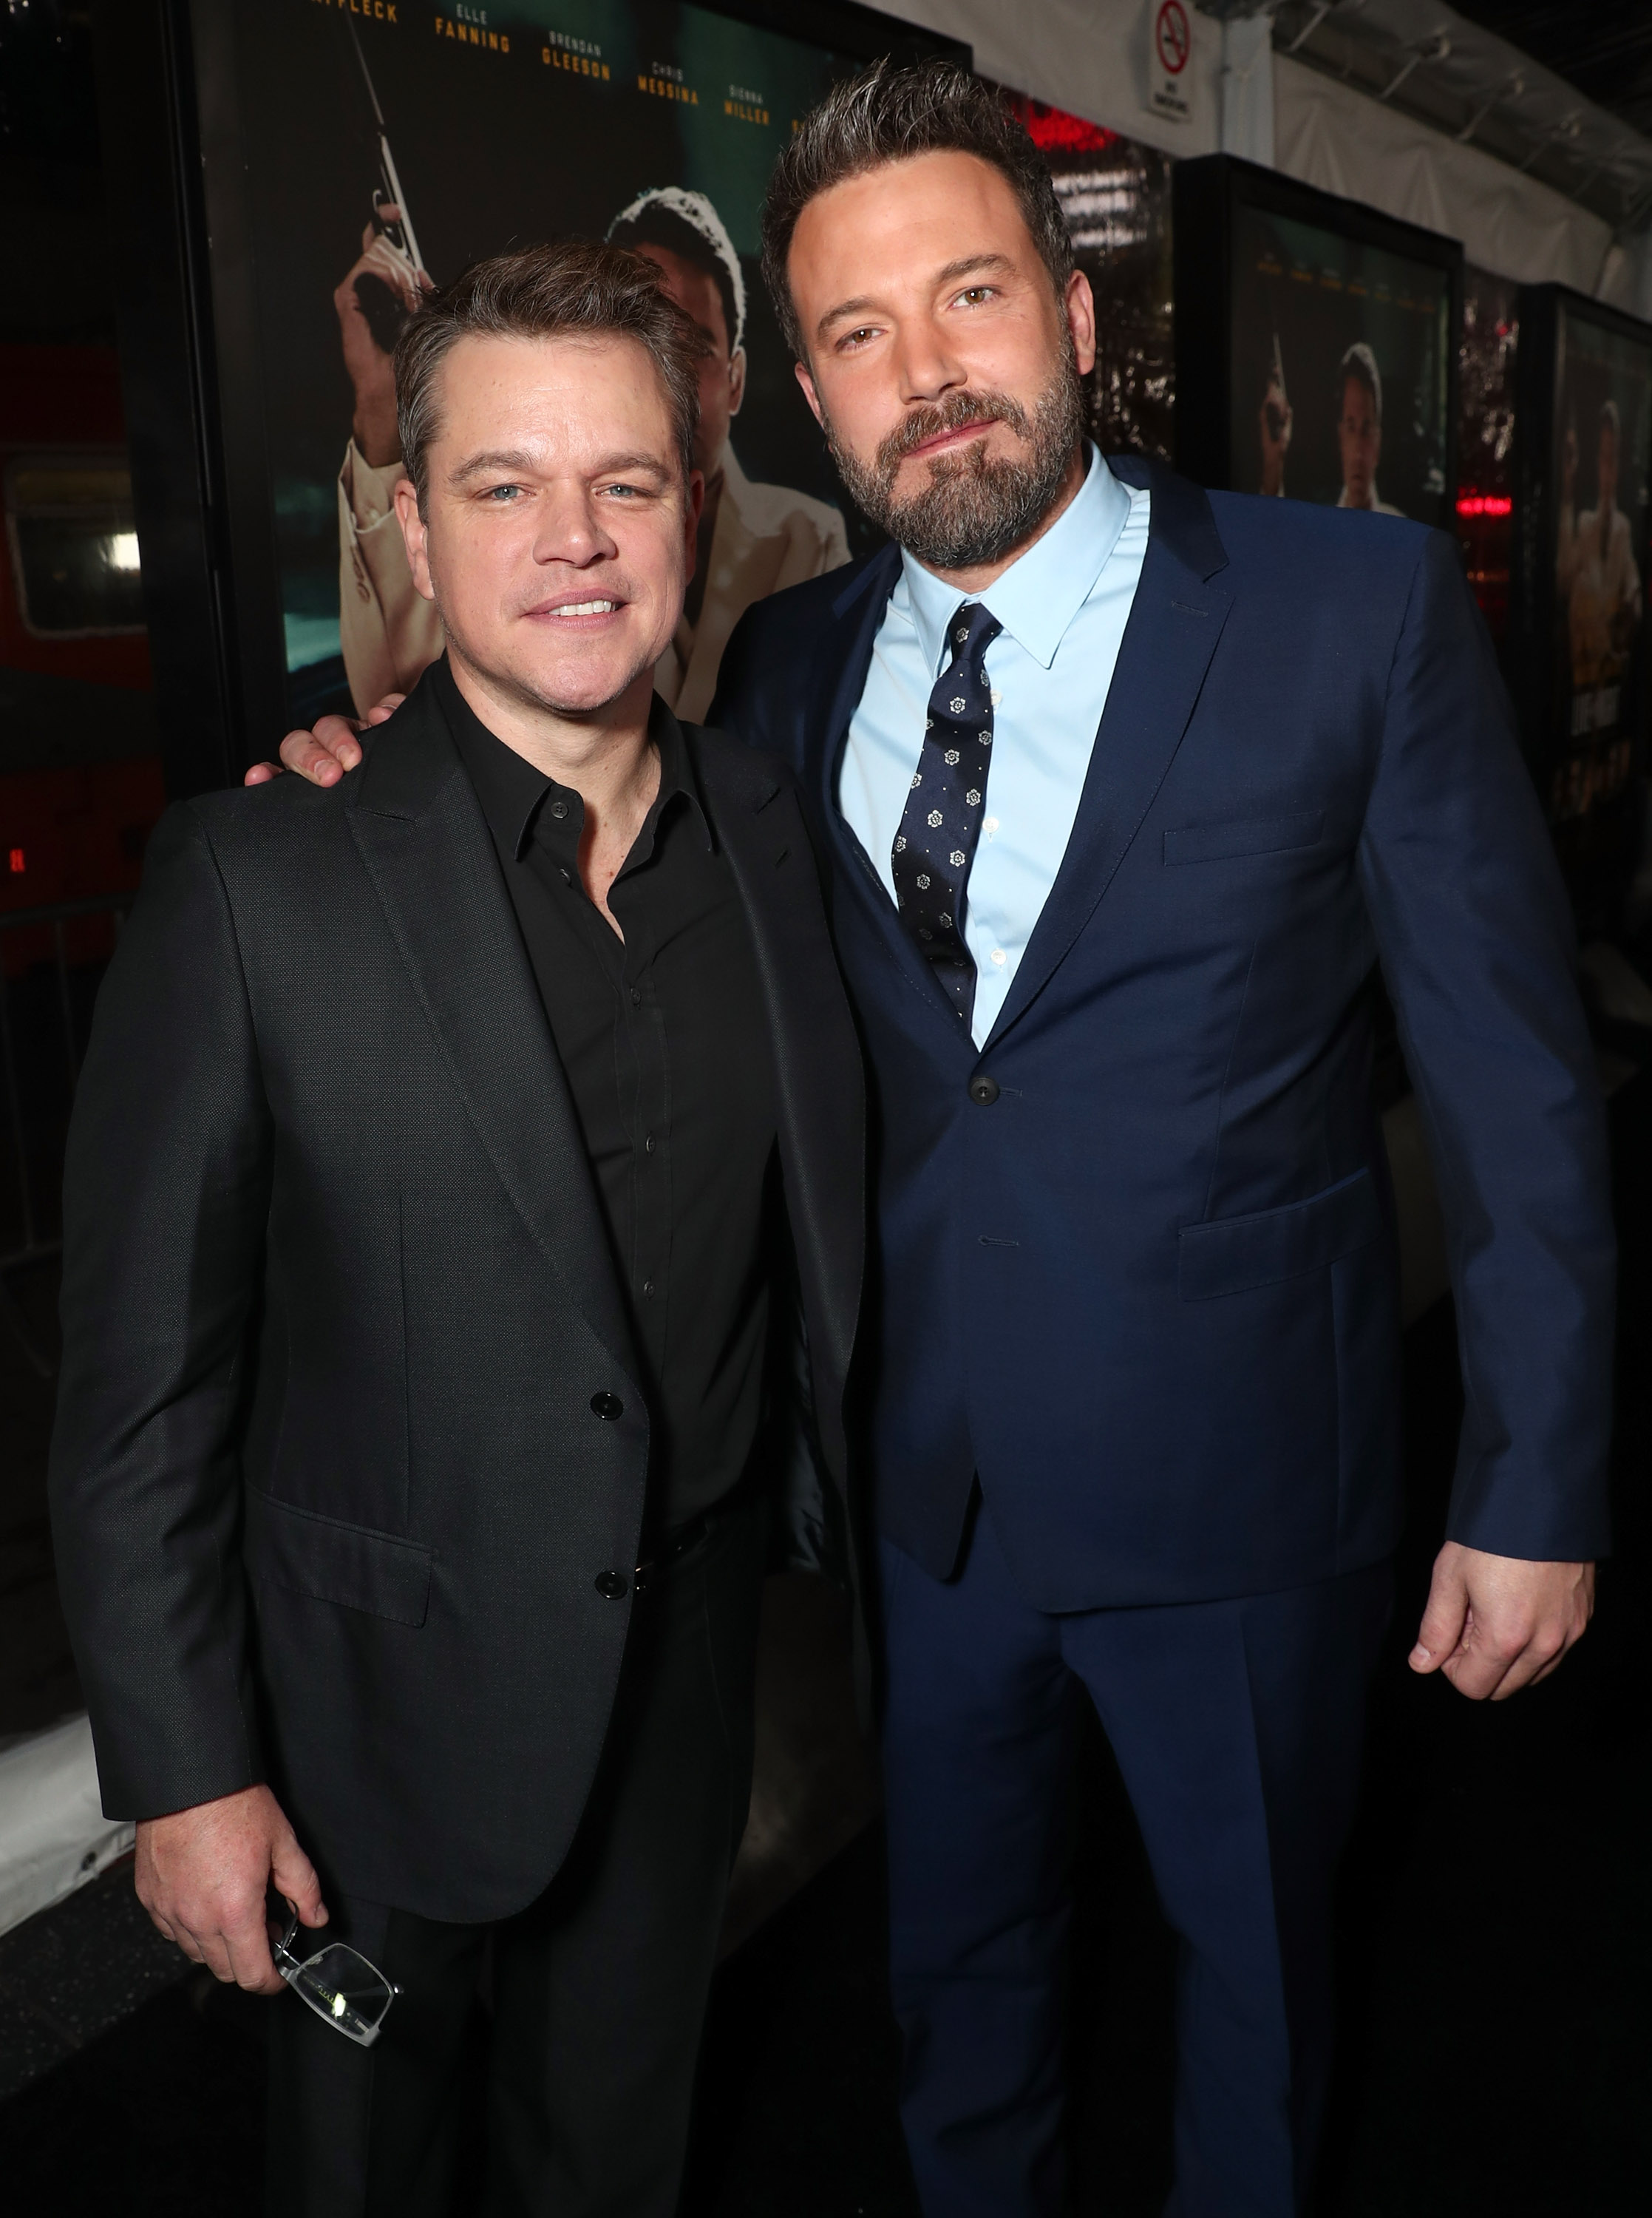 Fans Say Ben Affleck’s Son Looks Like Matt Damon Who Is Close to the ...